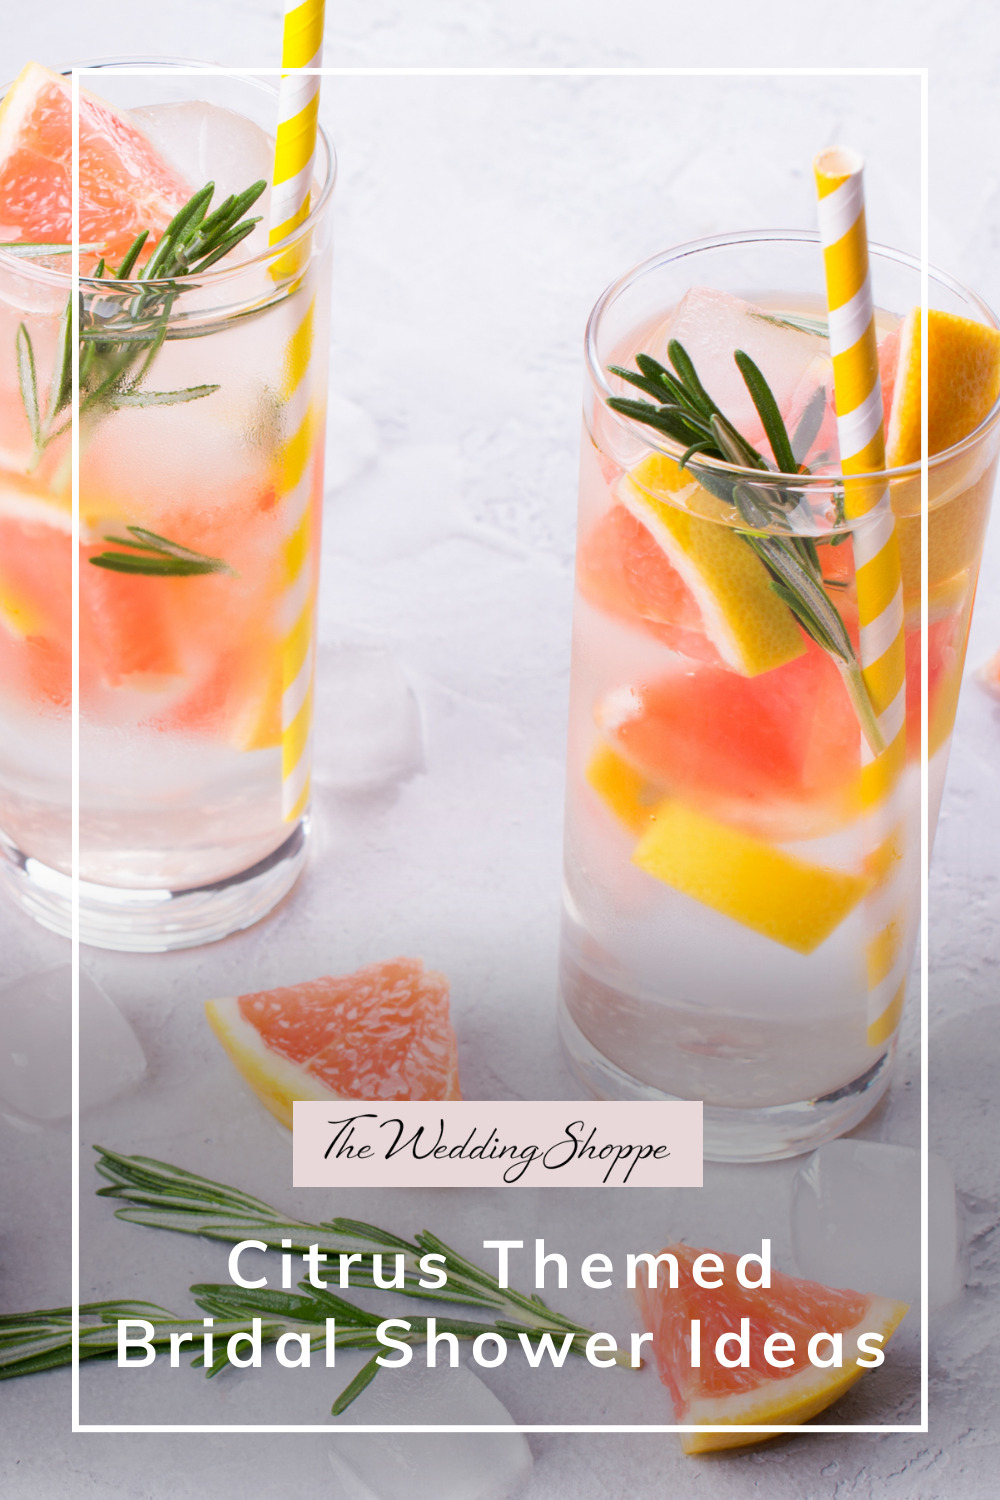 pinnable graphic for "Citrus Themed Bridal Shower Ideas" from The Wedding Shoppe